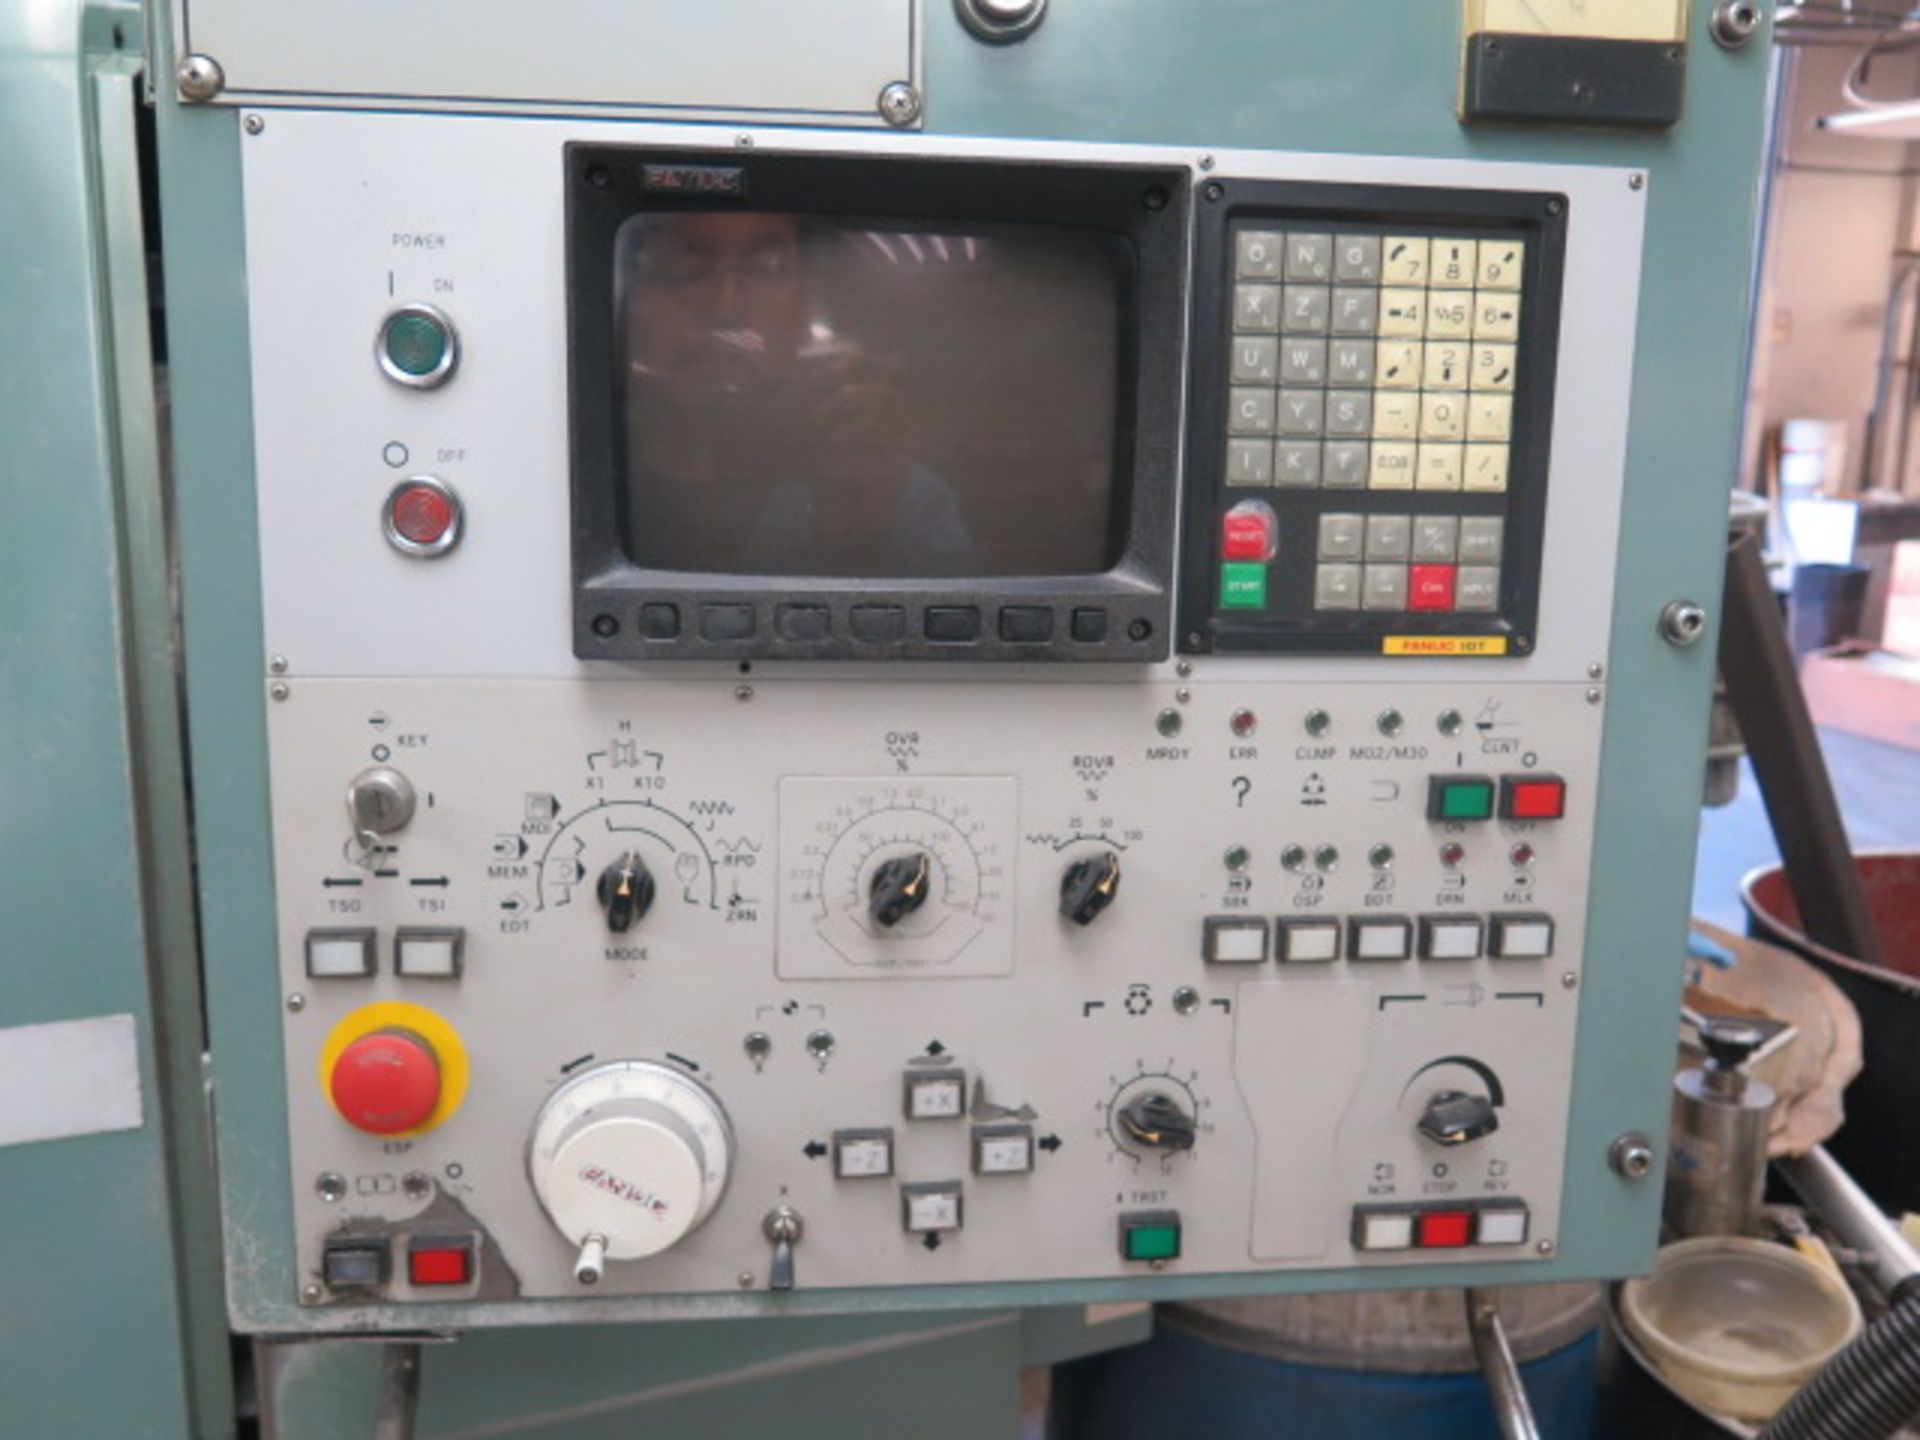 Mori Seiki SL-1A CNC Turning Center s/n 836 w/ Fanuc 10T Controls, 12-Station Turret, SOLD AS IS - Image 9 of 12